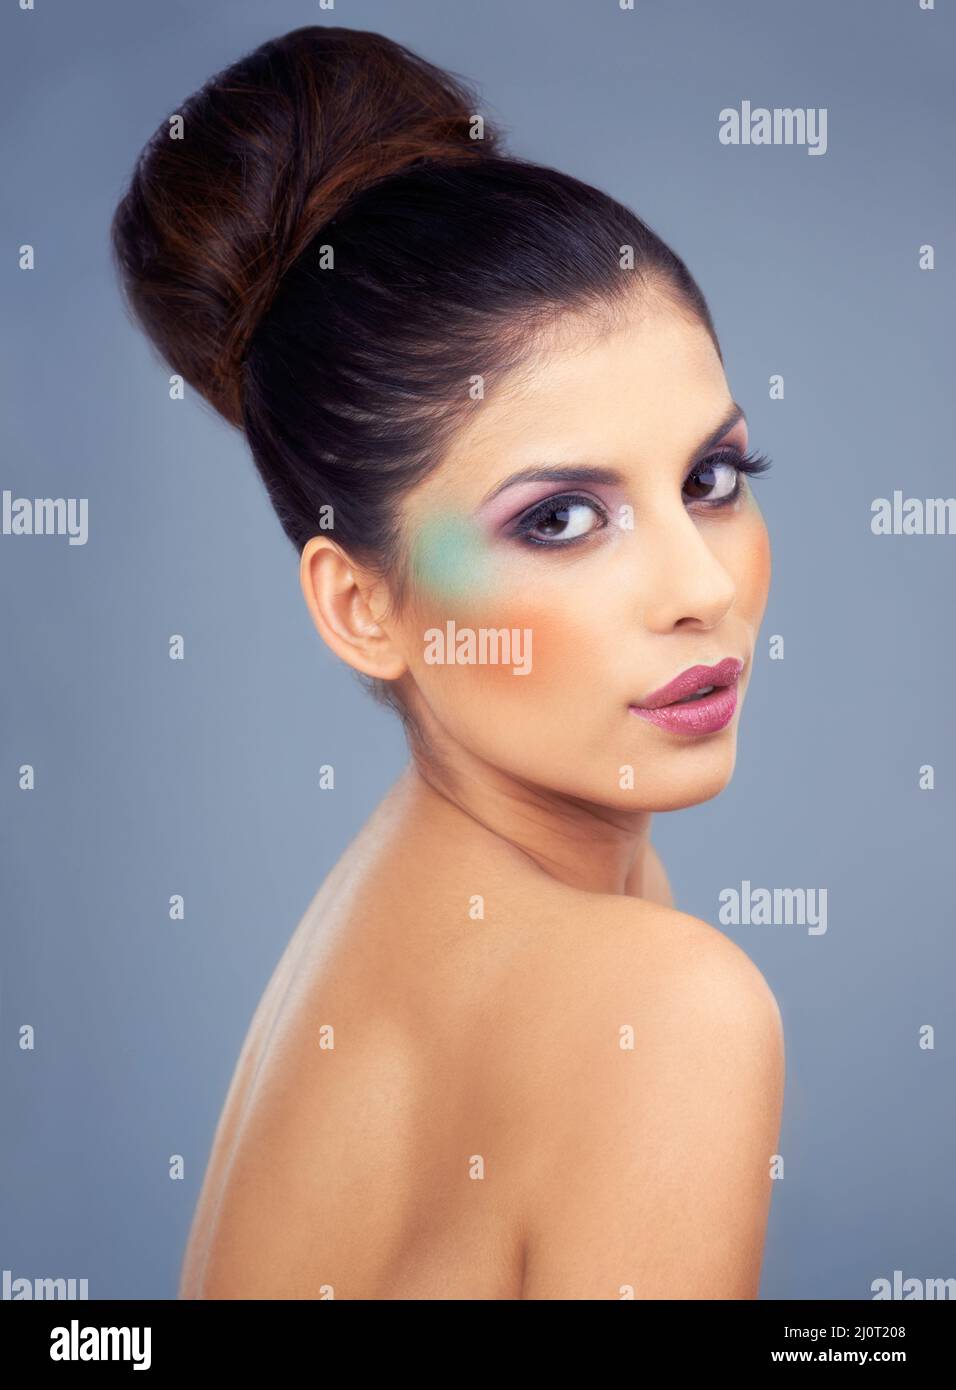 She uses makeup to highlight her best features. Cropped shot of a beautiful young woman wearing bold makeup. Stock Photo